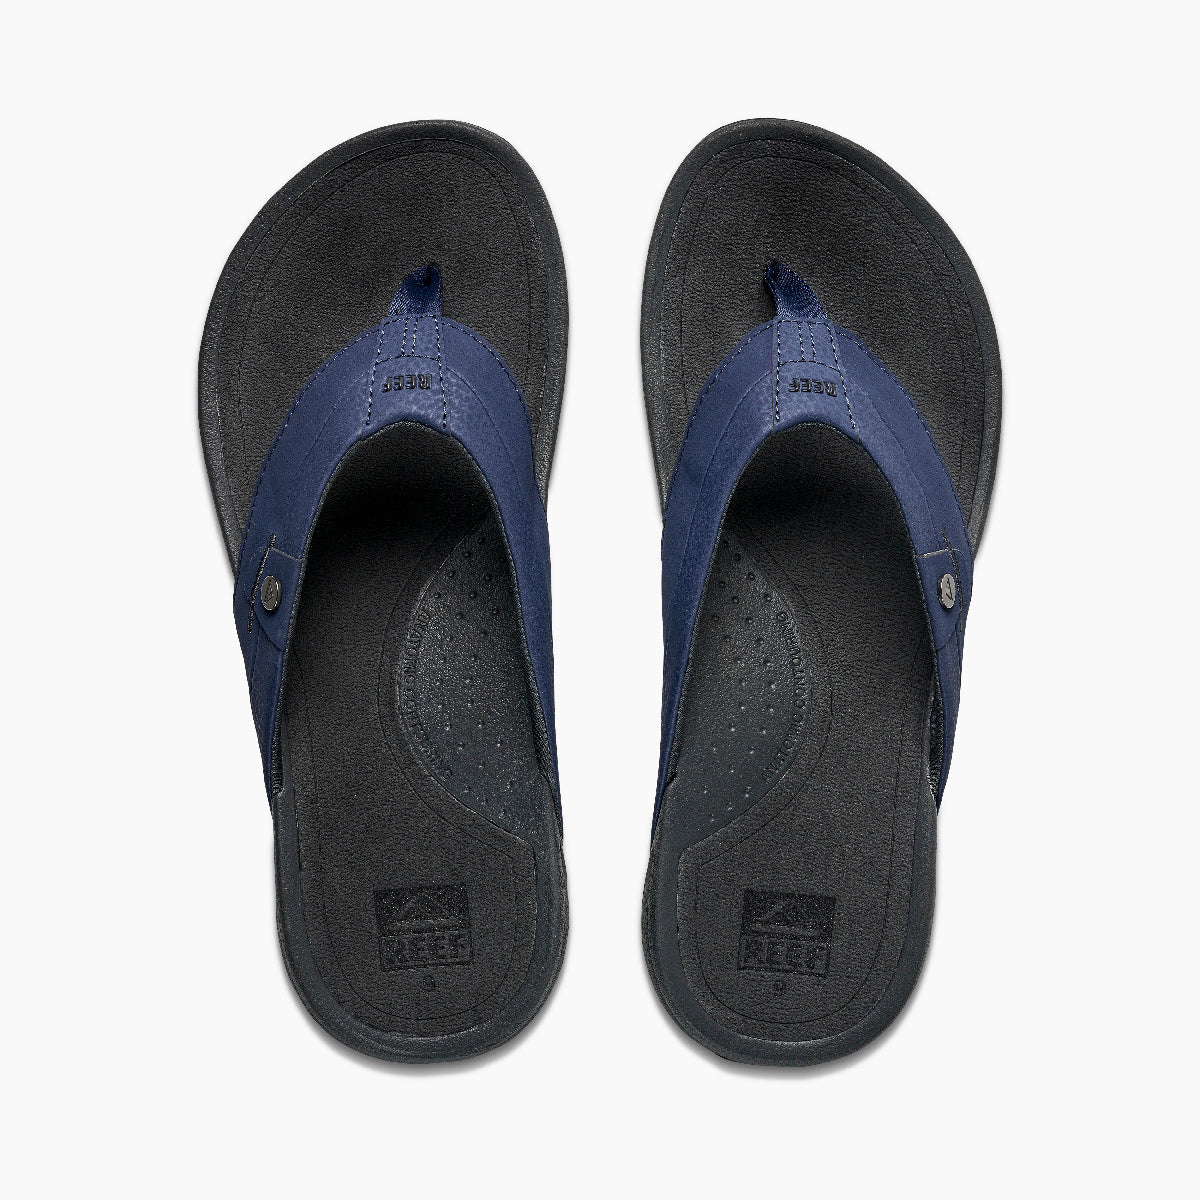 Reef Pacific Men's Sandals - Free Shipping